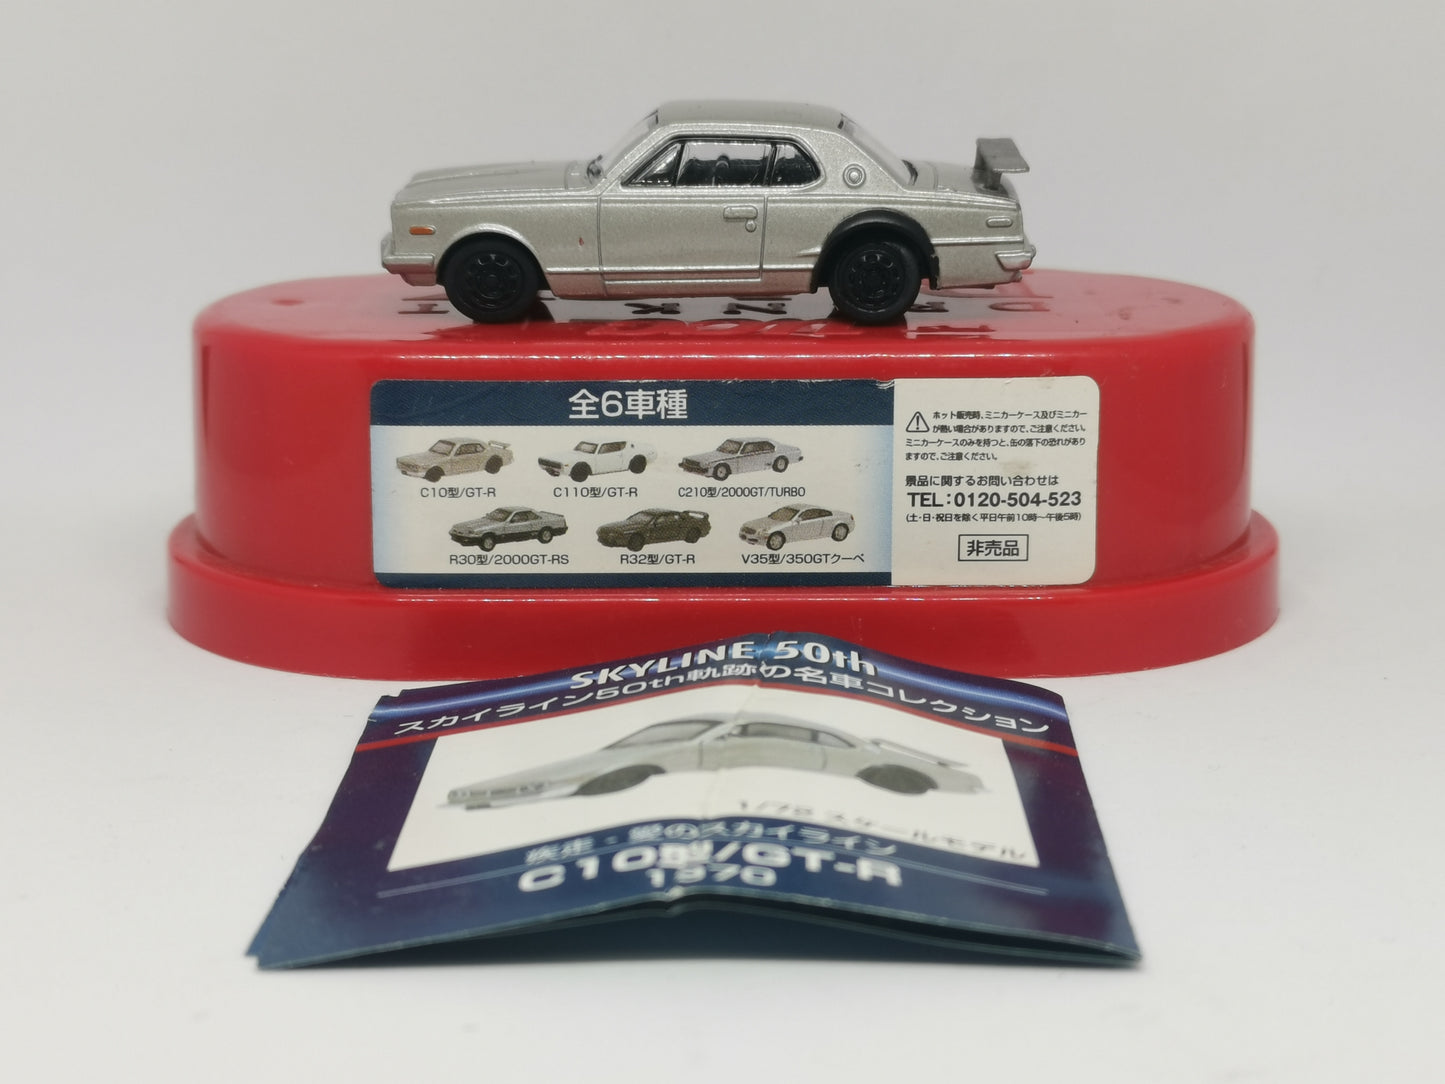 Japan UCC Coffee Gift Nissan C10 GT-R 1:72 Scale